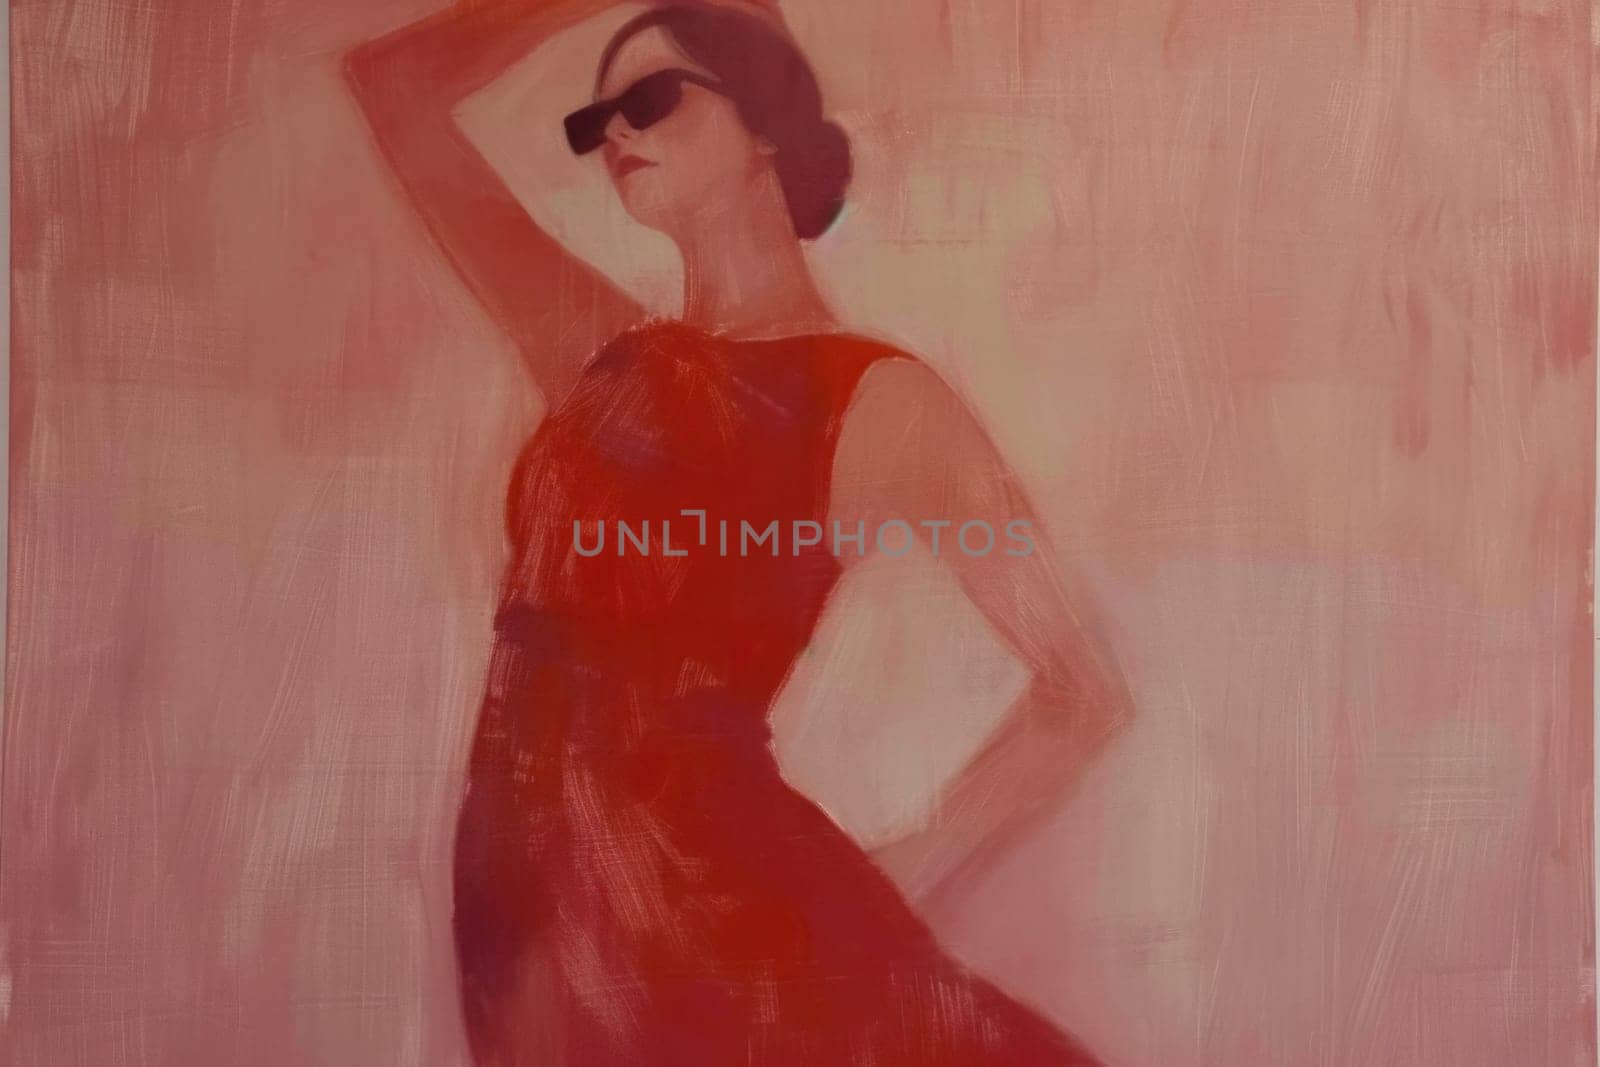 Fashion statement woman in red dress and sunglasses posing with elegance and style in artistic painting